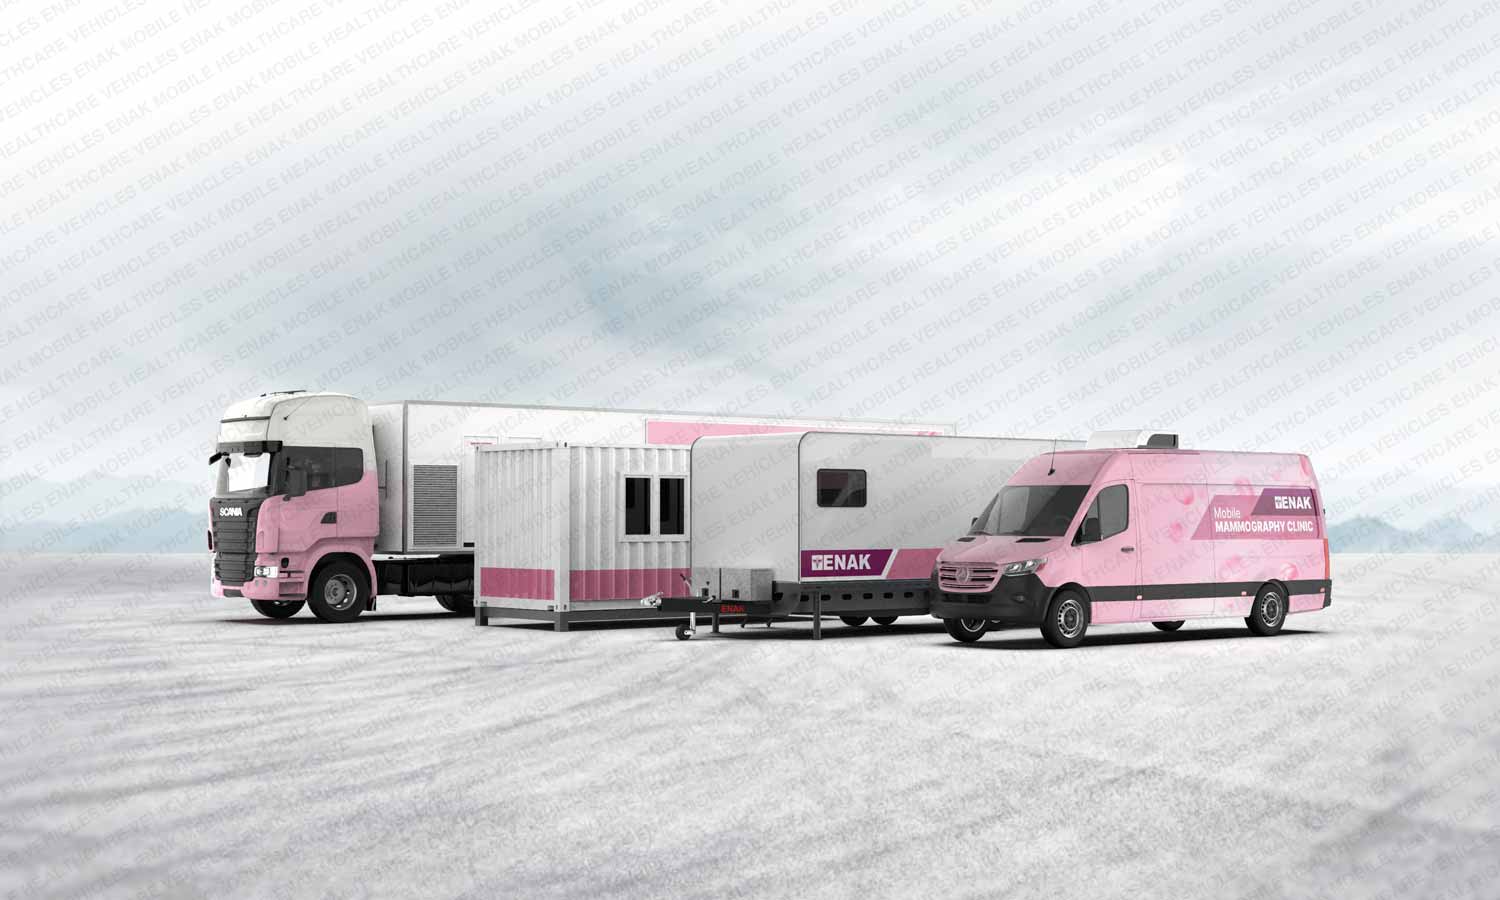 Mobile Mammography Clinic